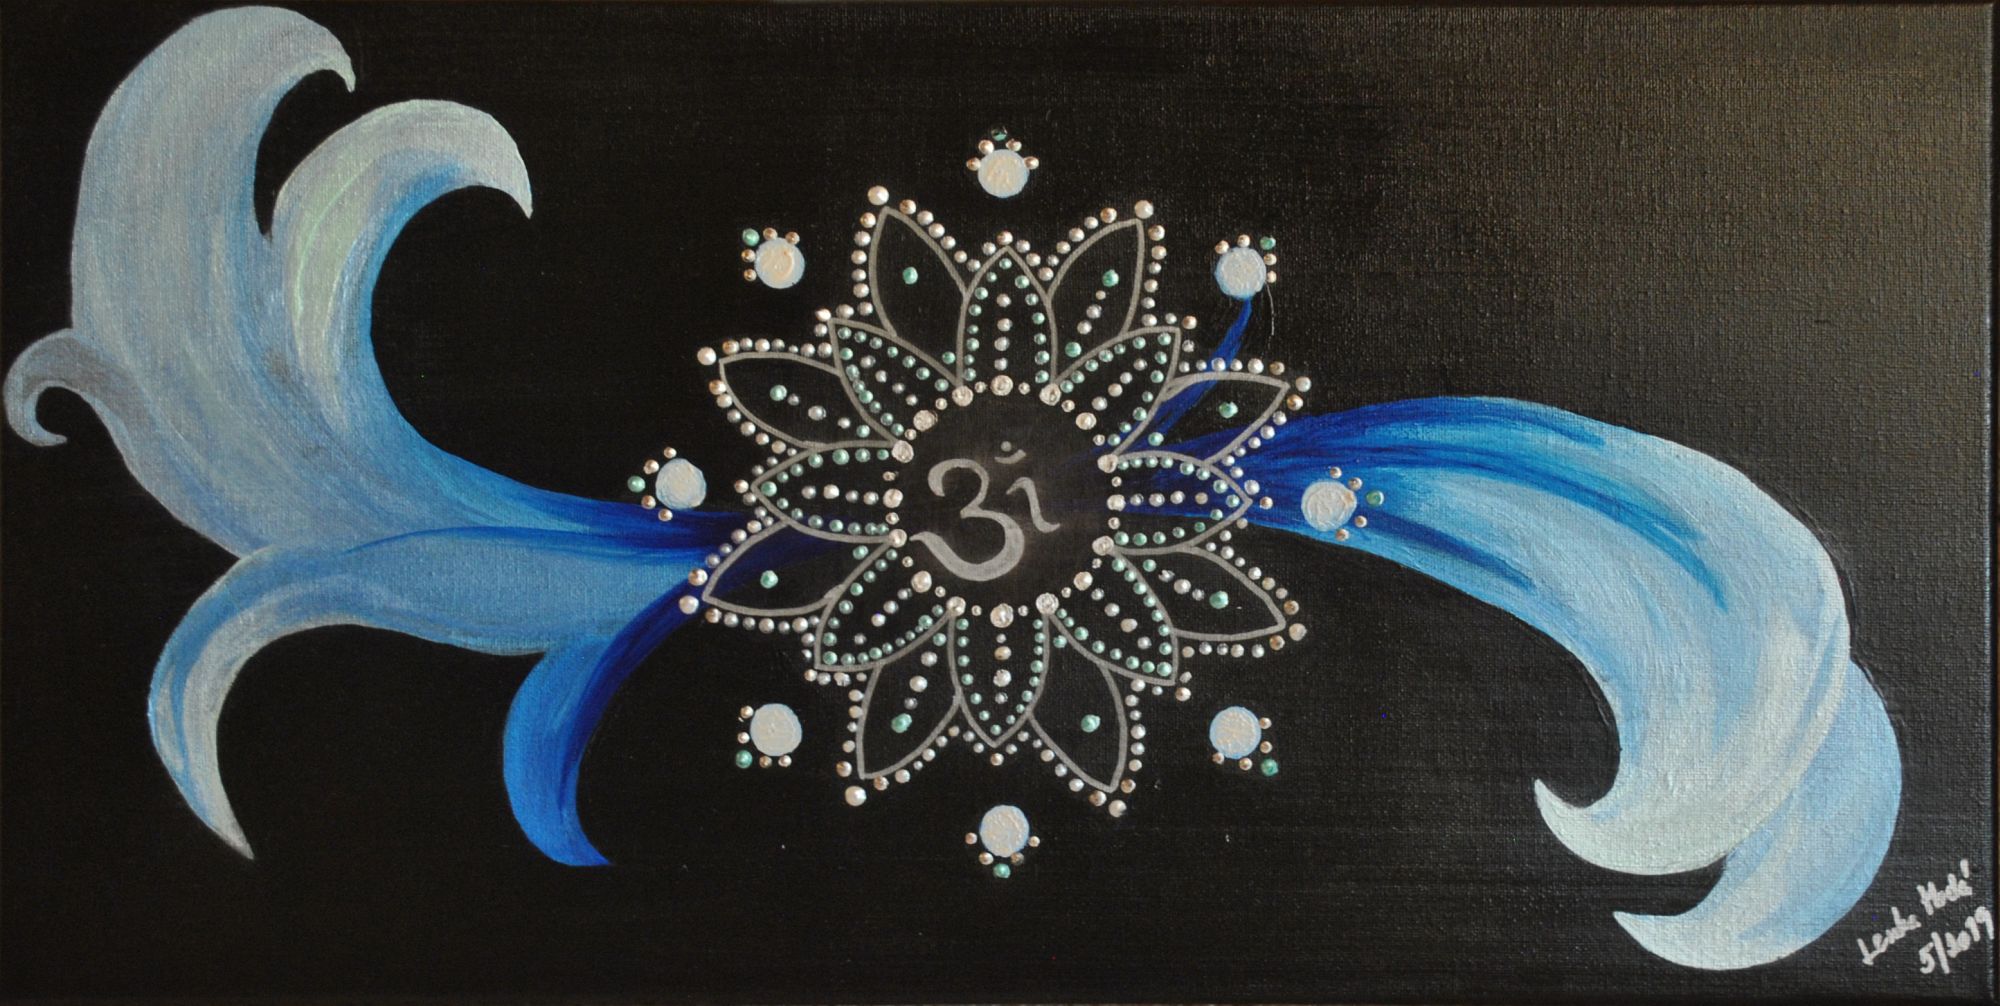 A small blue mandala with a namaste sign, completed with abstraction
Signed

